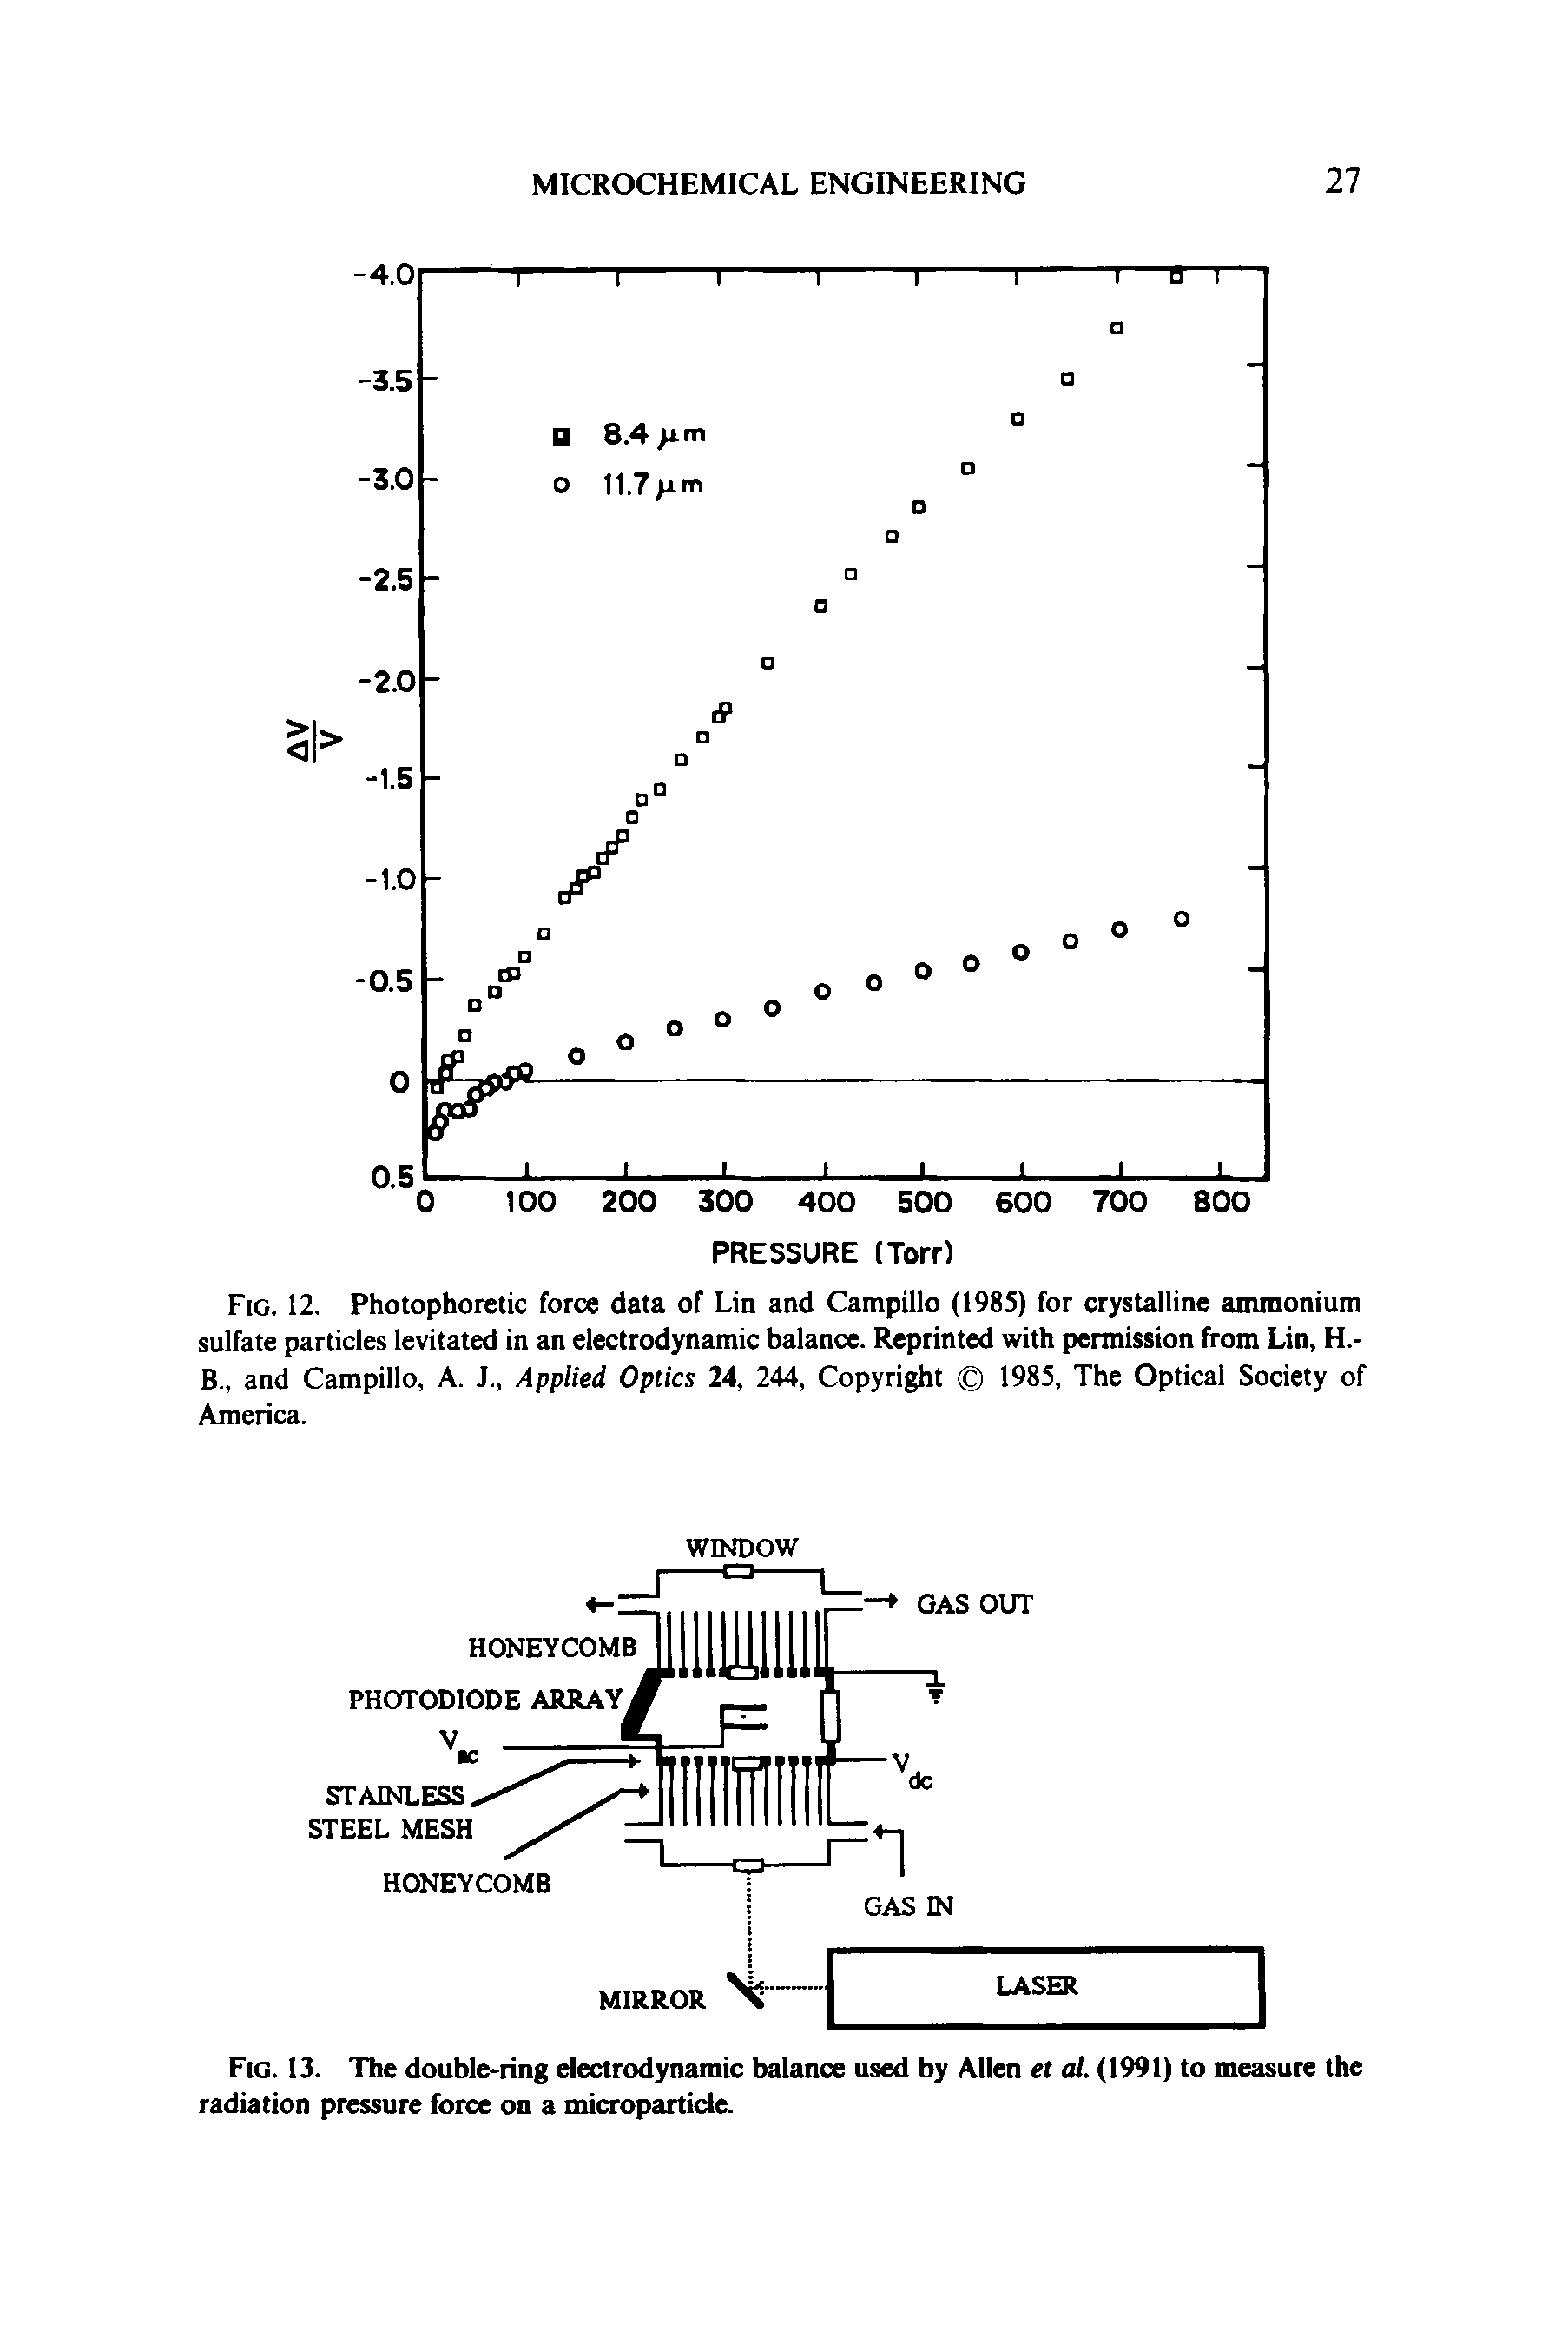 Fig. 12, Photophoretic force data of Lin and Campillo (1985) for crystalline ammonium sulfate particles levitated in an electrodynamic balance. Reprinted with permission from Lin, H.-B., and Campillo, A. J., Applied Optics 24, 244, Copyright 1985, The Optical Society of America.